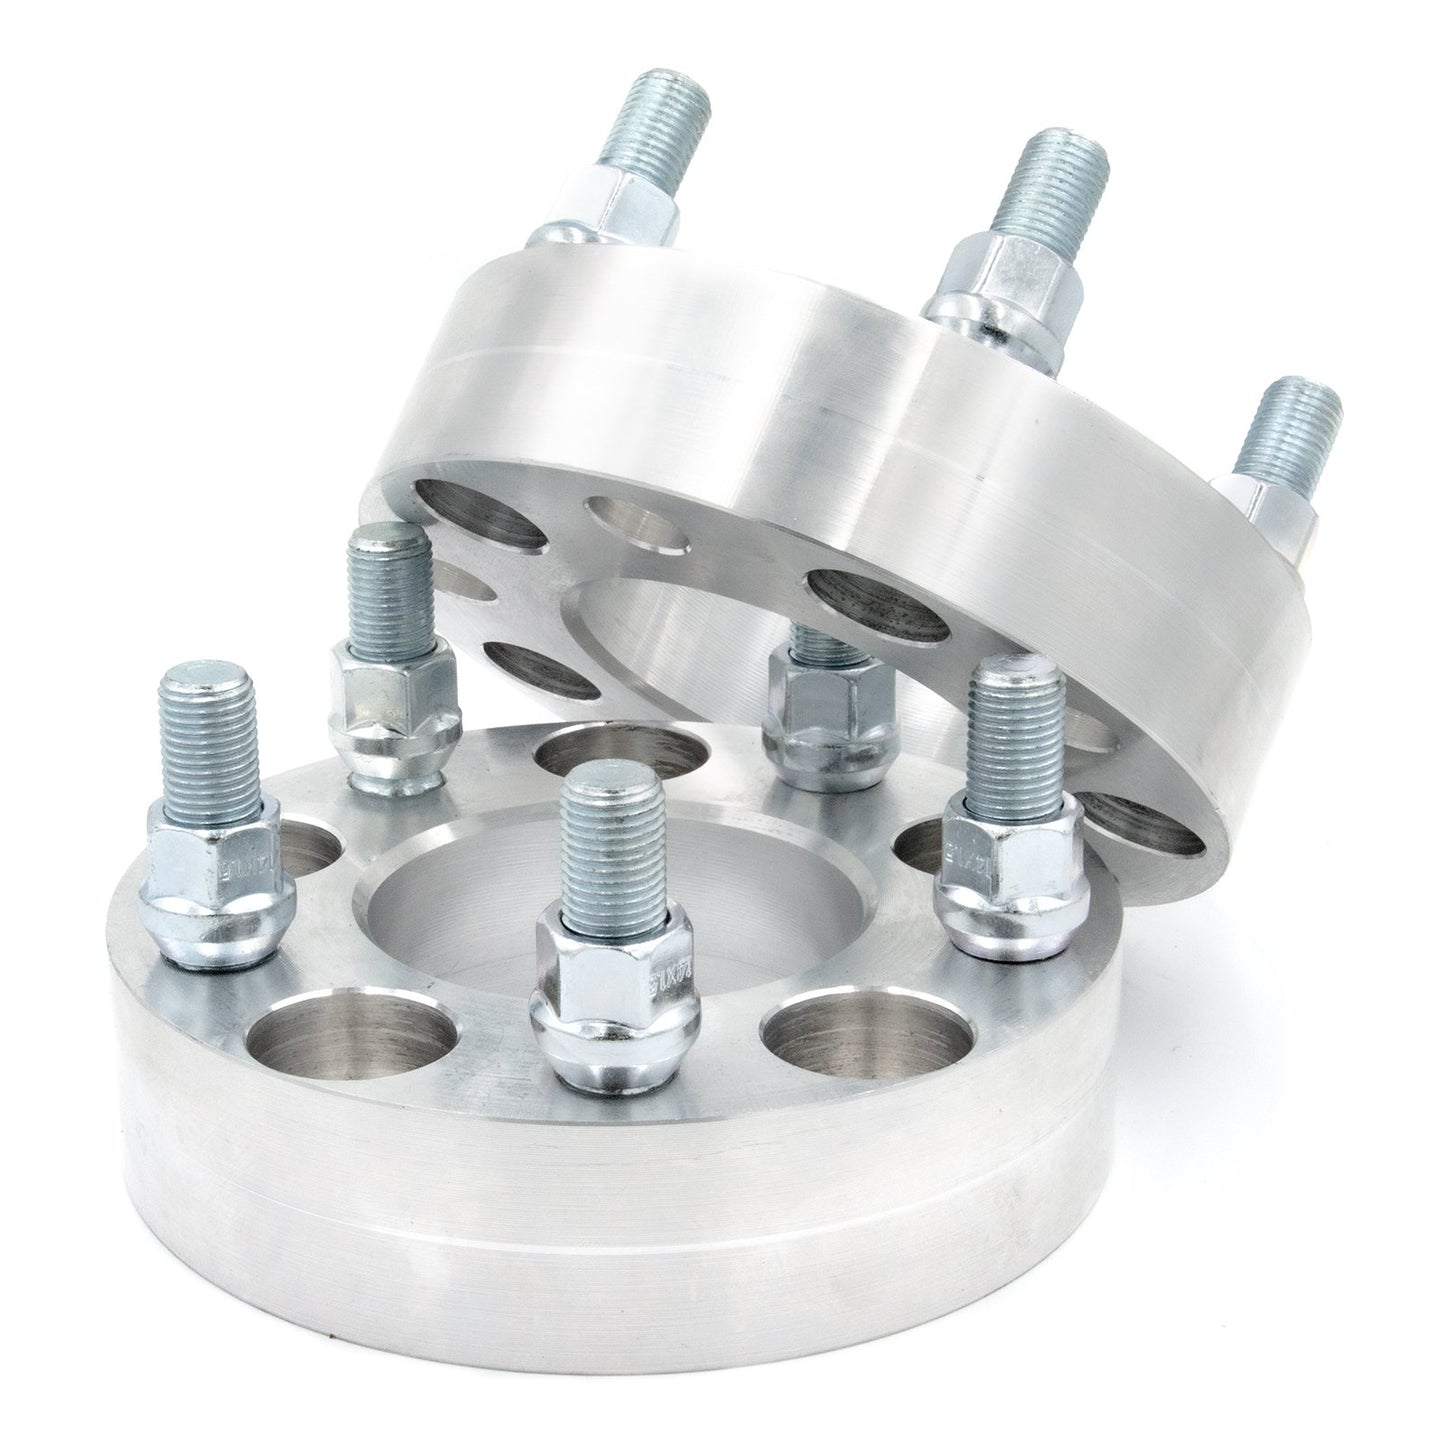 5x135 to 5x130 Wheel Spacer/Adapter - Thickness: 3/4"- 4"